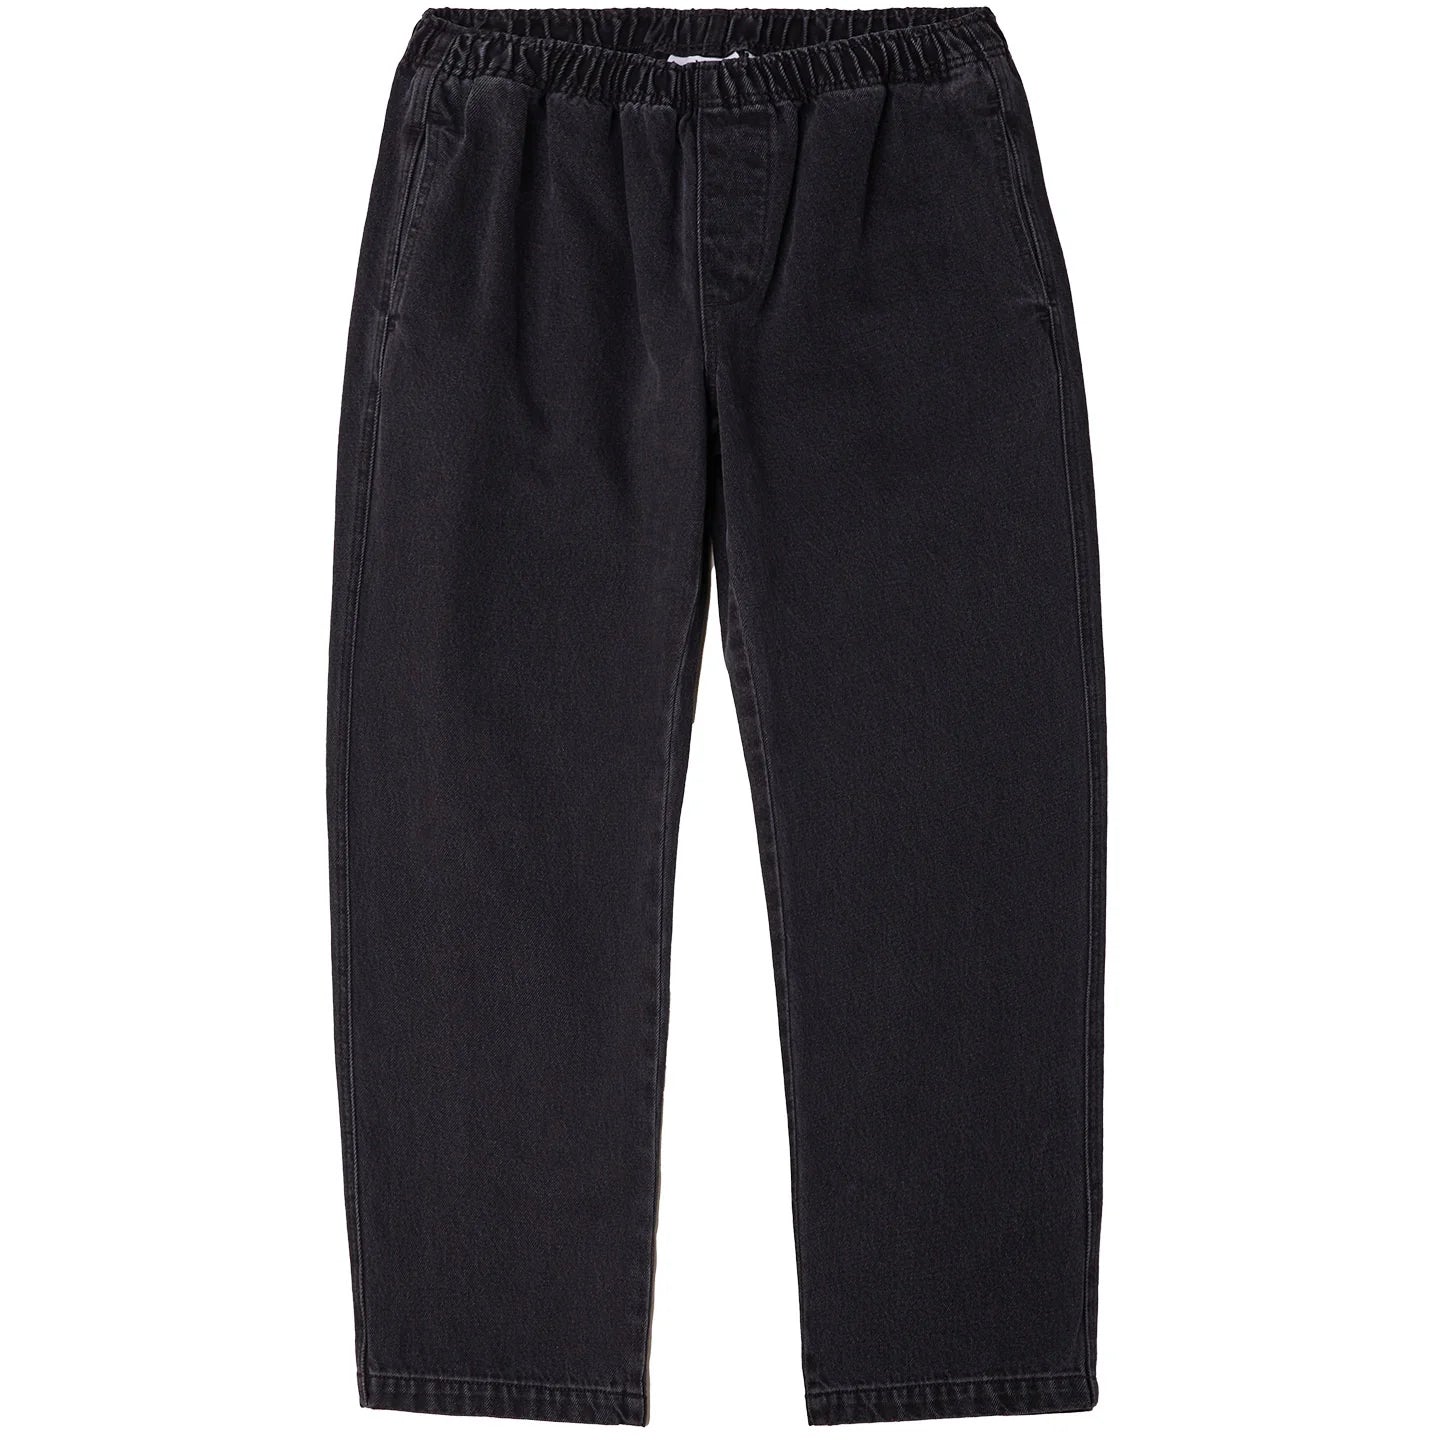 OBEY EASY DENIM PANT - Black Faded